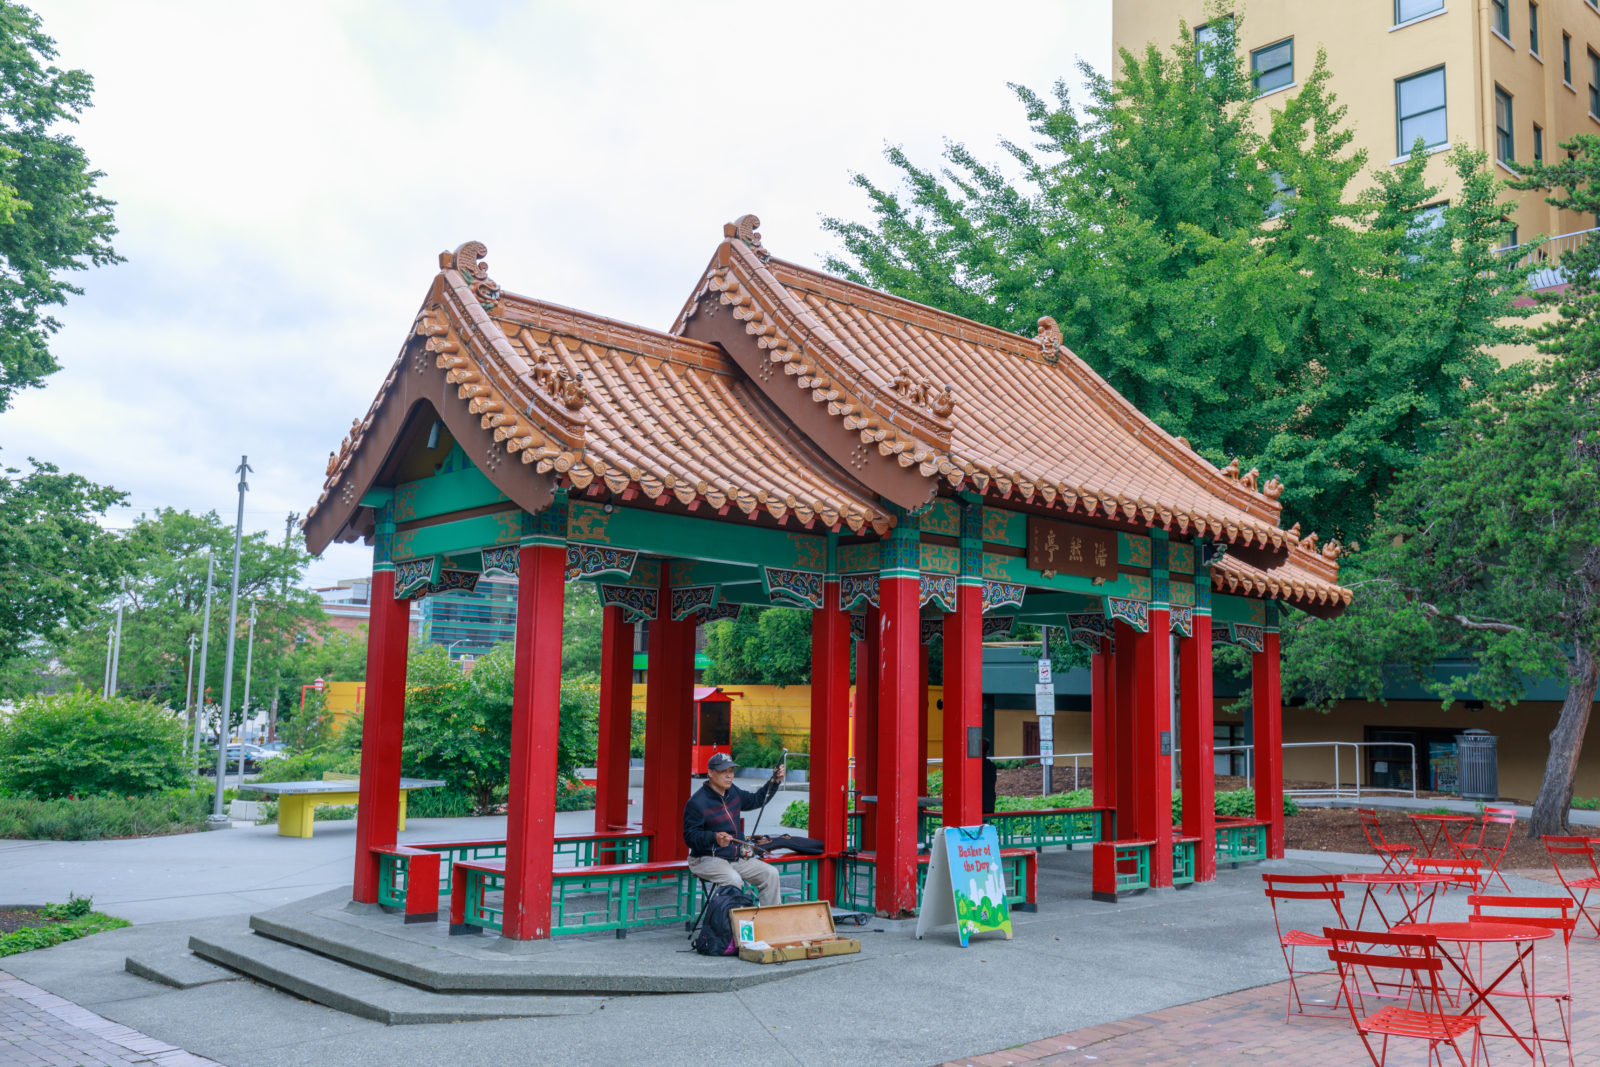 View of Hing Hay Park with pavilion built in Seattle Chinatown